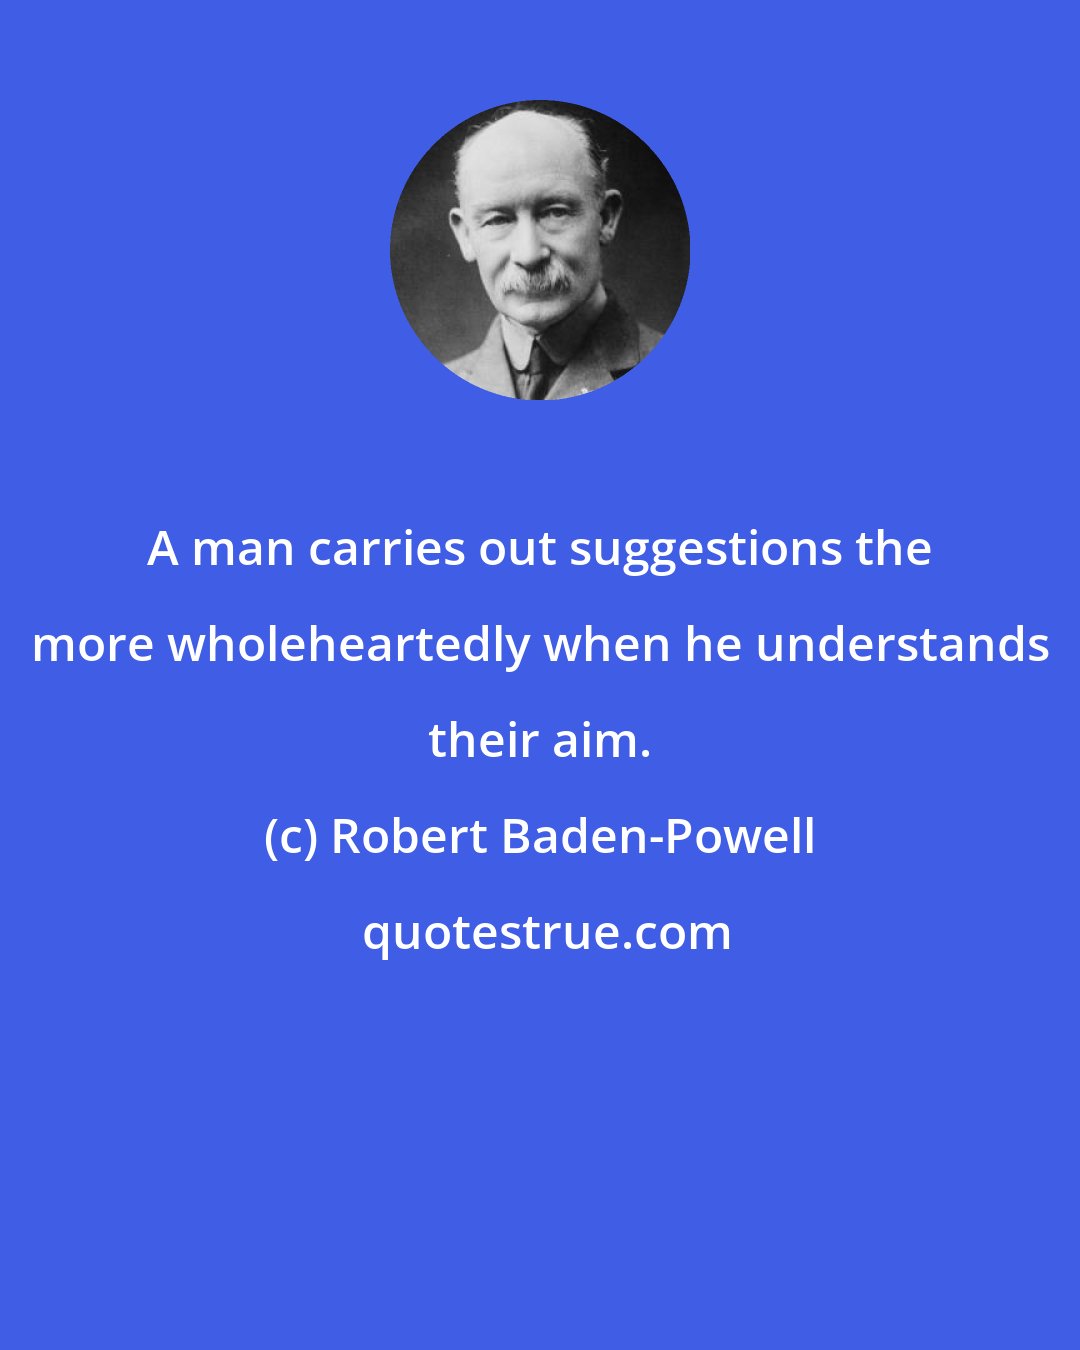 Robert Baden-Powell: A man carries out suggestions the more wholeheartedly when he understands their aim.